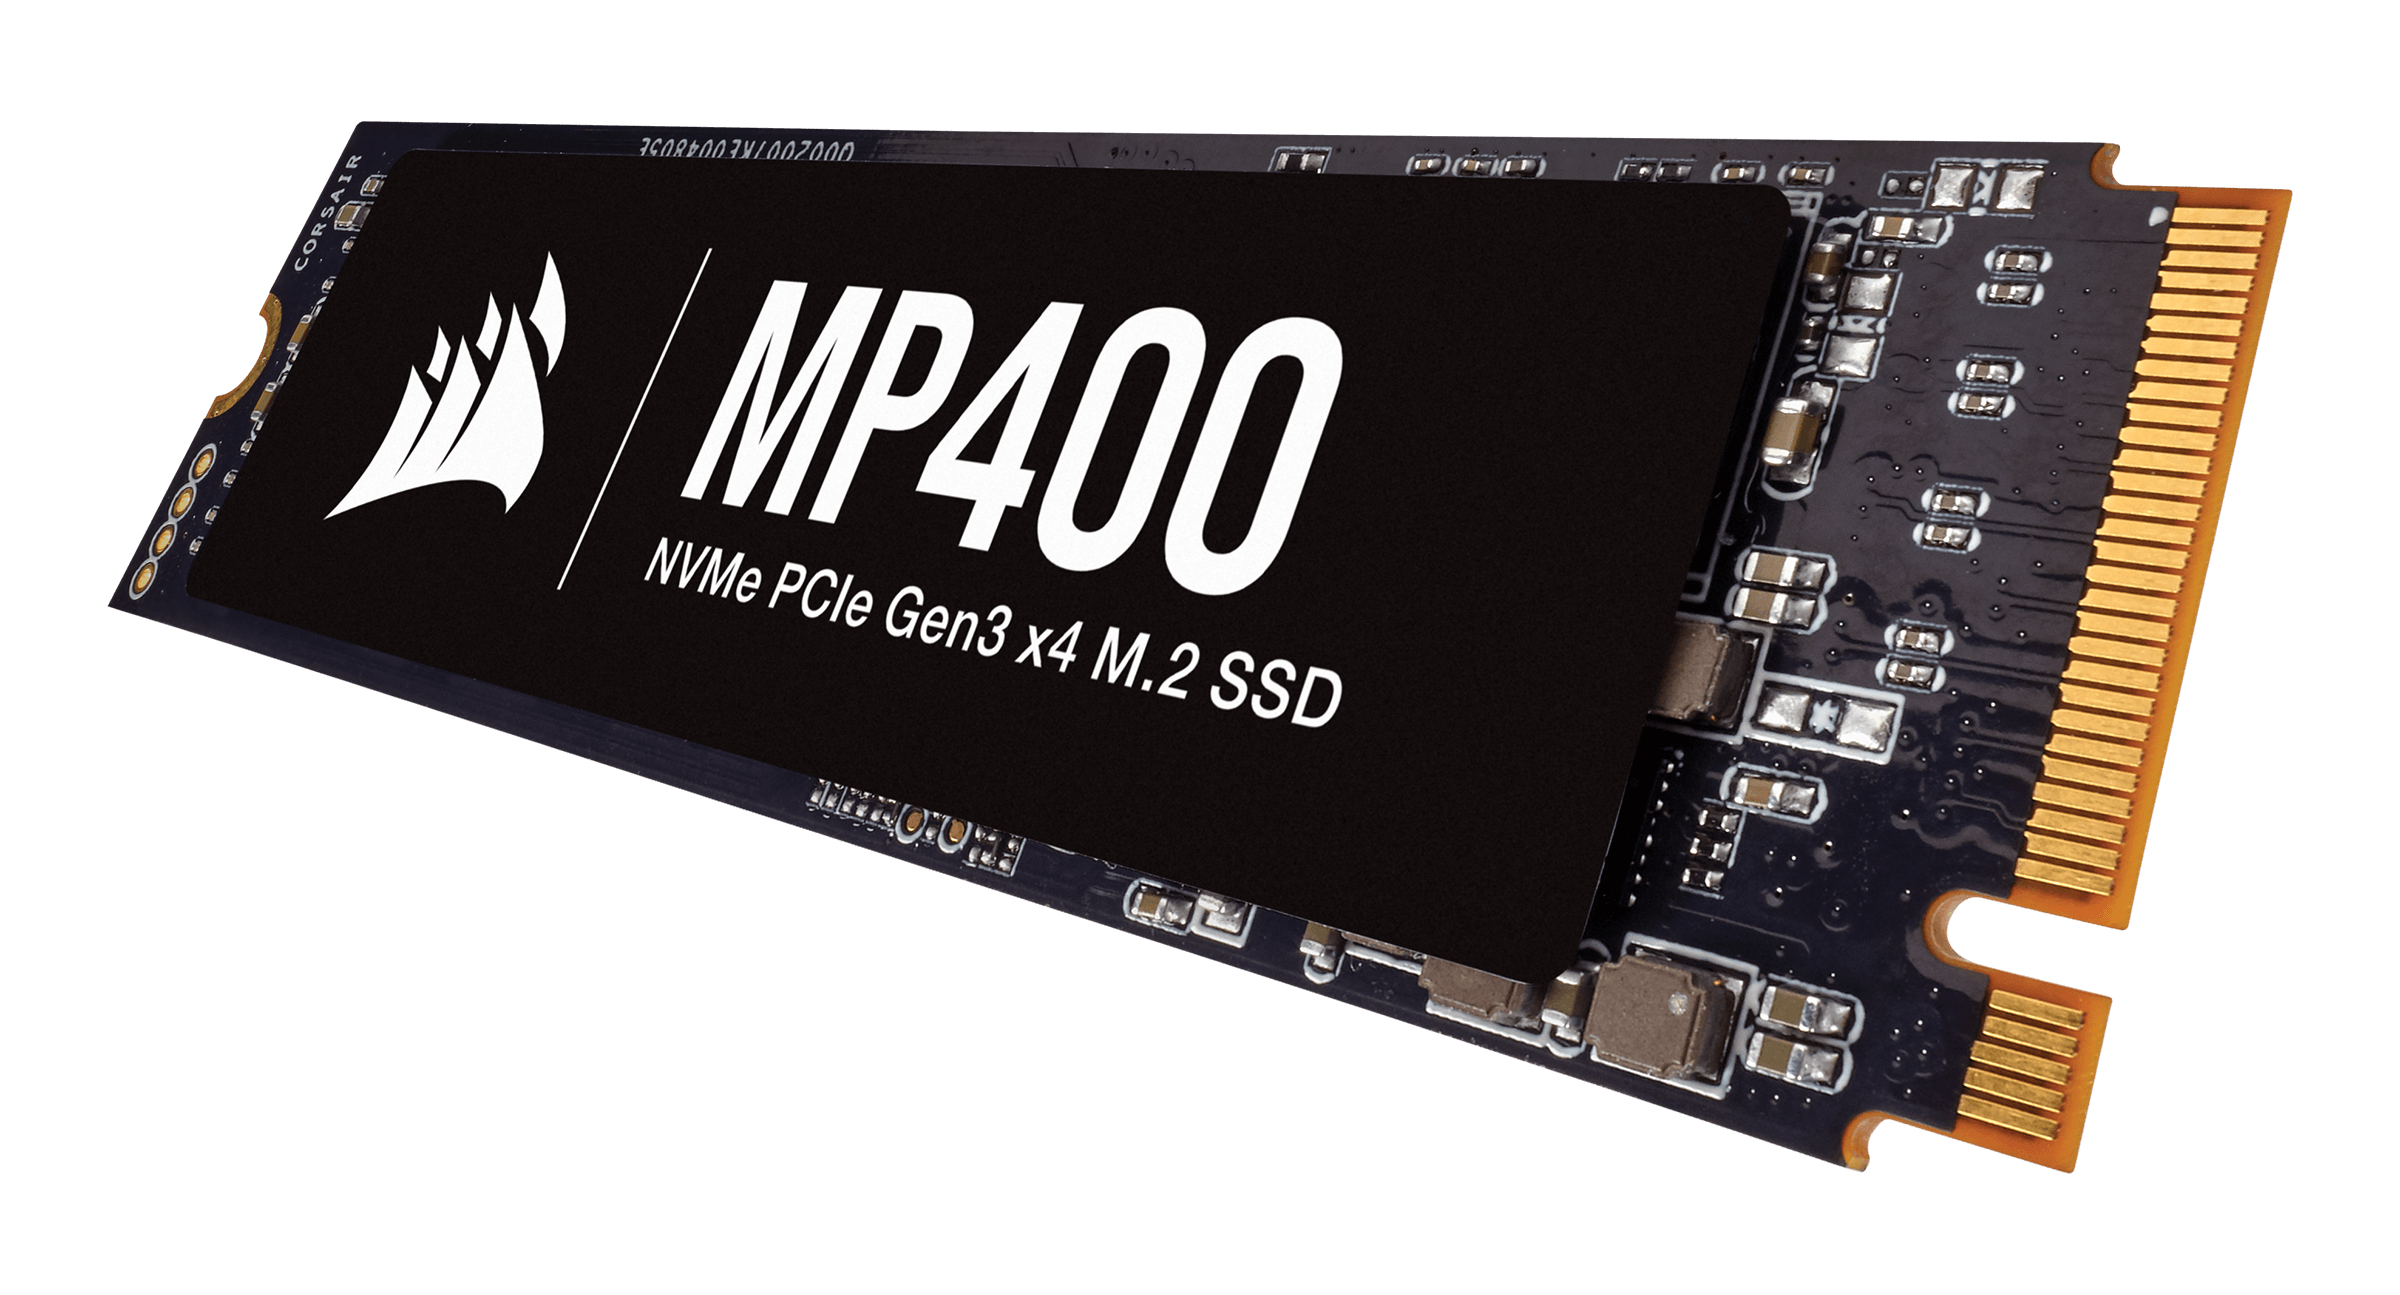 Postal code Indoors So many MP400 1TB NVMe PCIe M.2 SSD